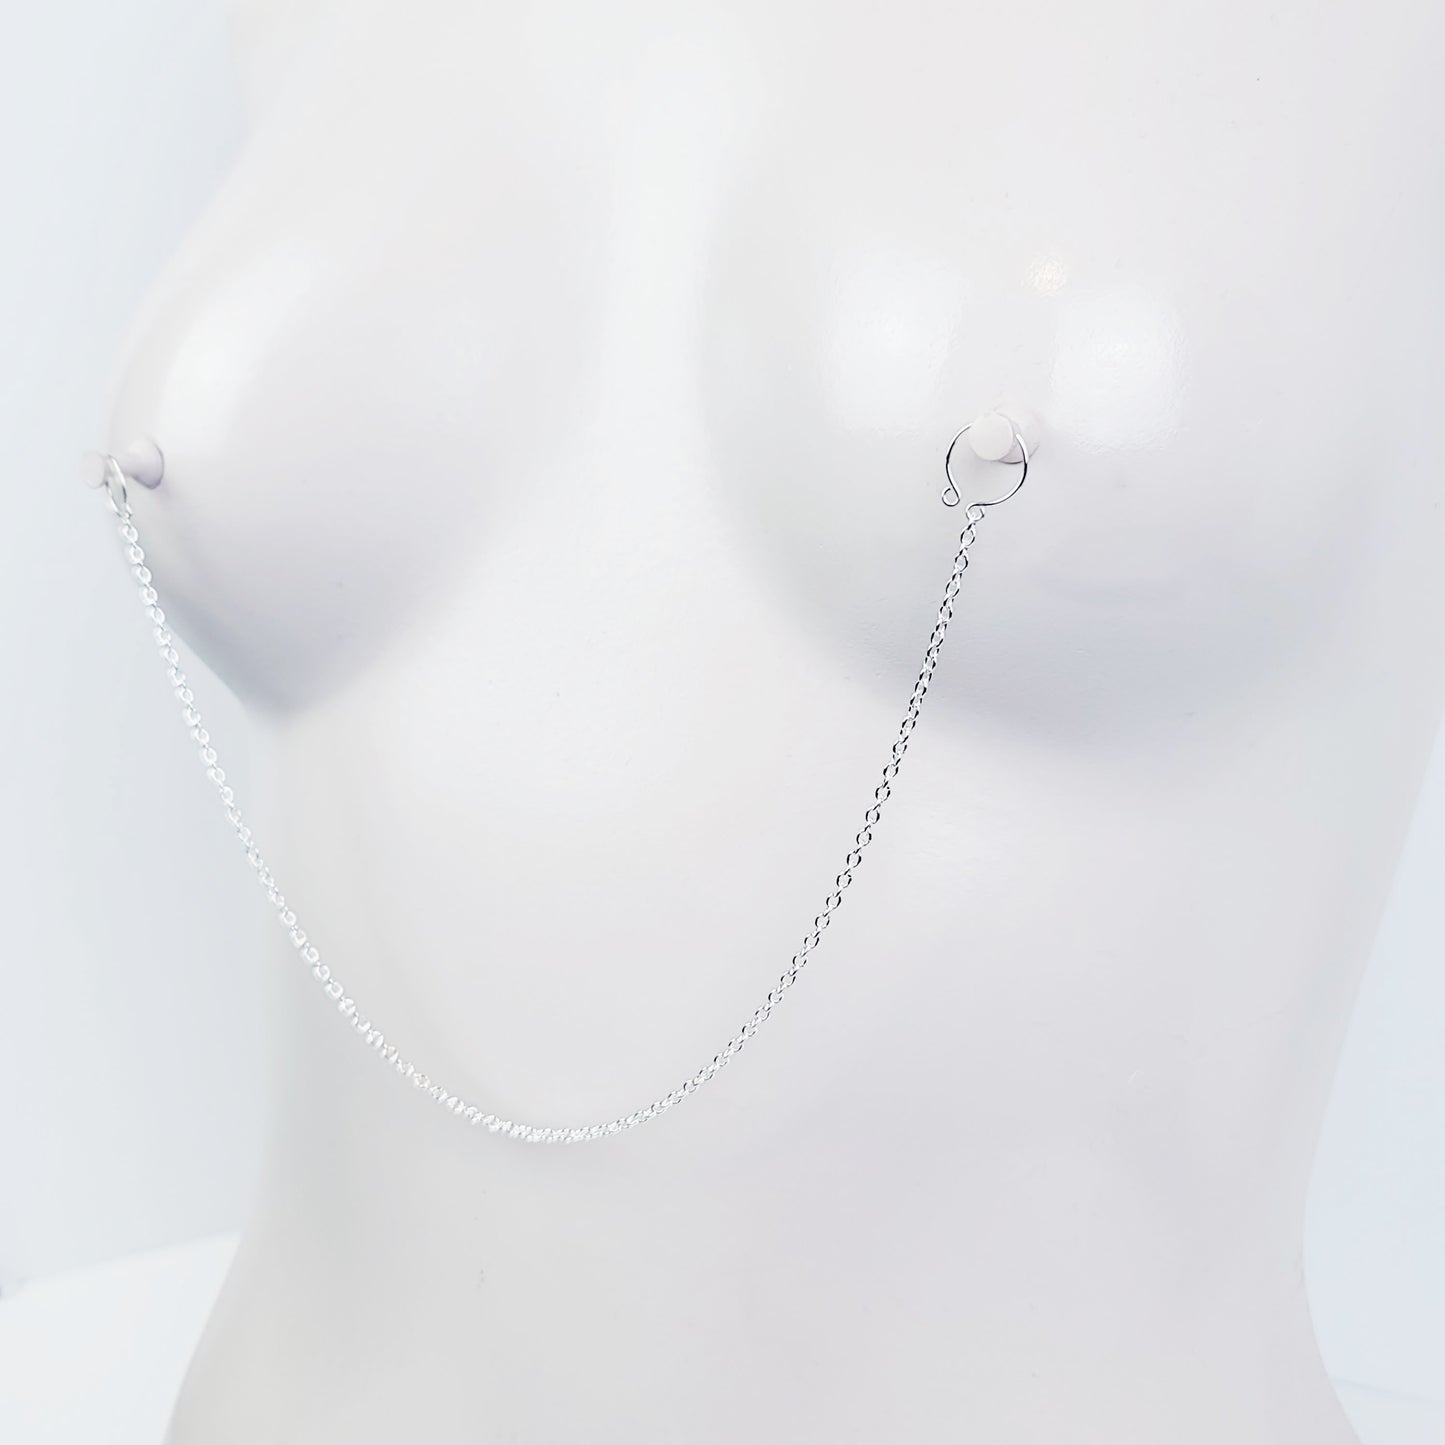 Nipple Chain with Non Piercing Nipple Rings in Silver, Gold, or Rose Gold. Erotic Intimate Body Jewelry for Women.